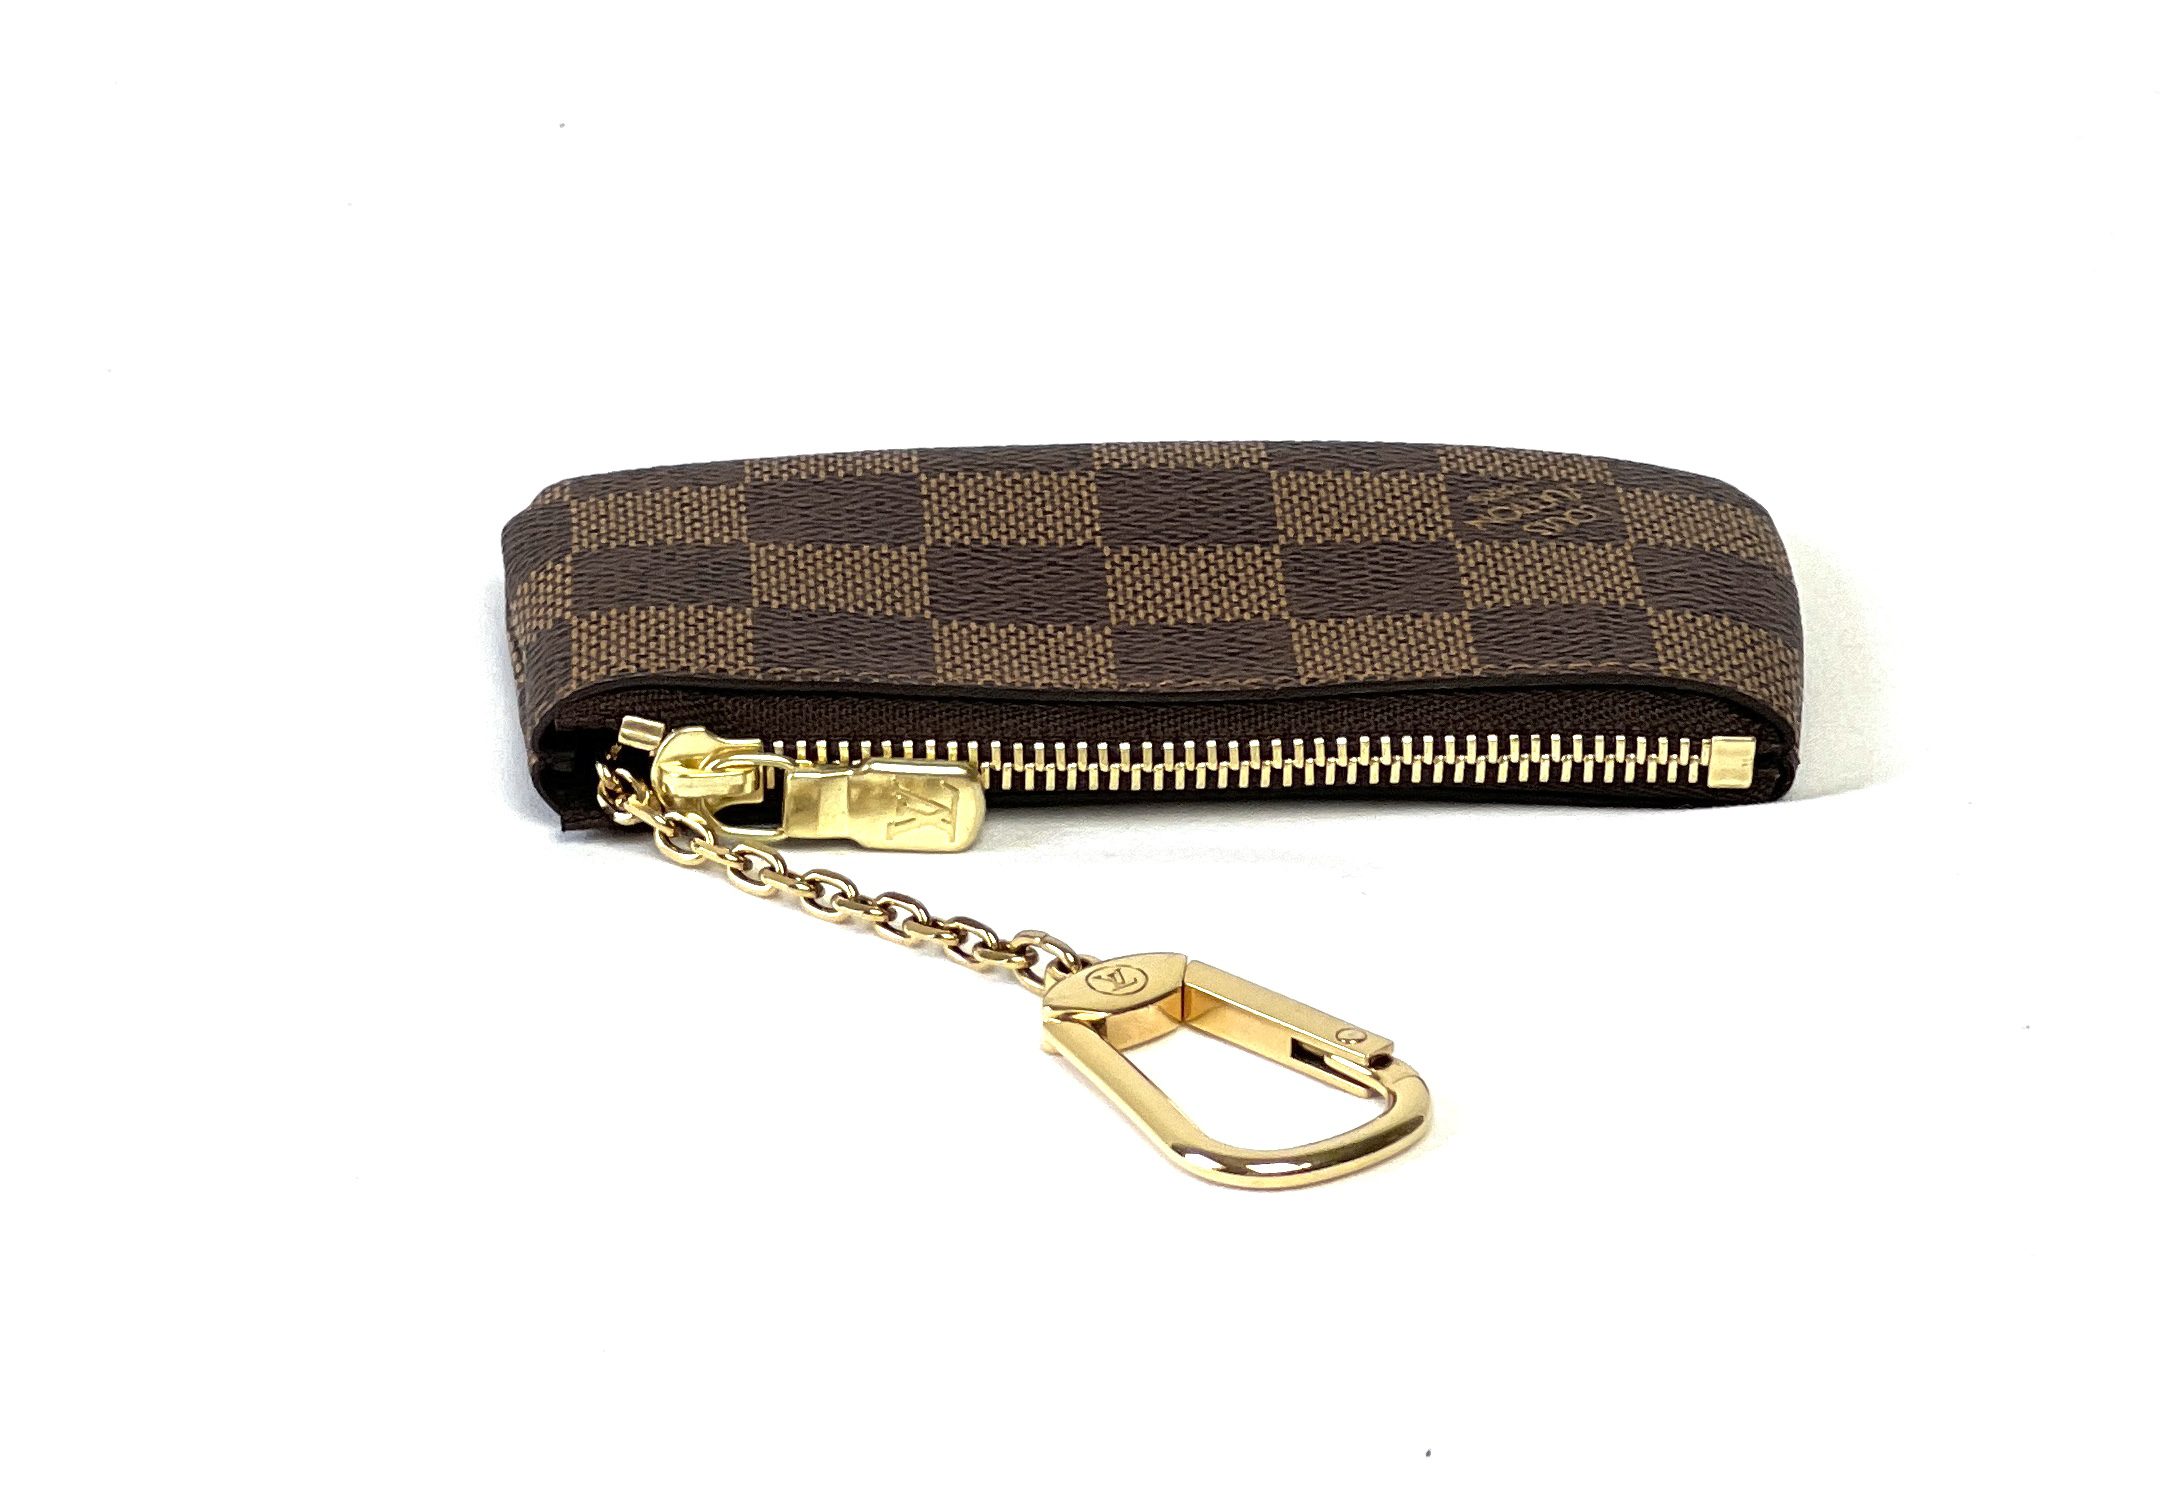 In Full Capacity: Louis Vuitton Key Pouch Review - Jena Pastor